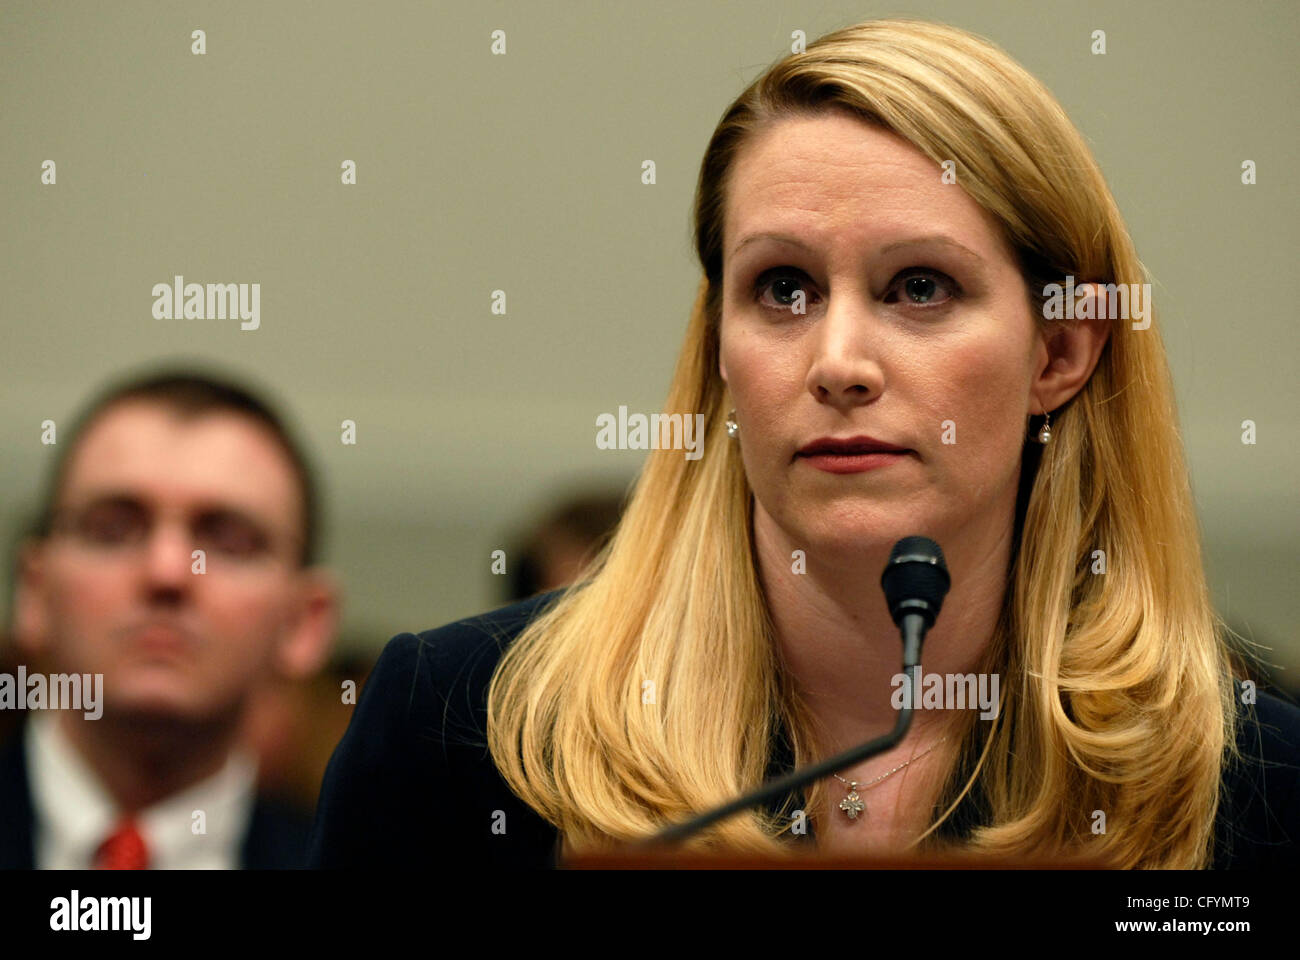 May 23, 2007 - Washington, DC, USA - Former Justice Department liaison to the White House, MONICA GOODLING, testfies before the House Judiciary committee about her role in the firing of US attorneys in late 2006 and early 2007. Goodling denied taken a major part in the scandal.  (Credit Image: © Mar Stock Photo